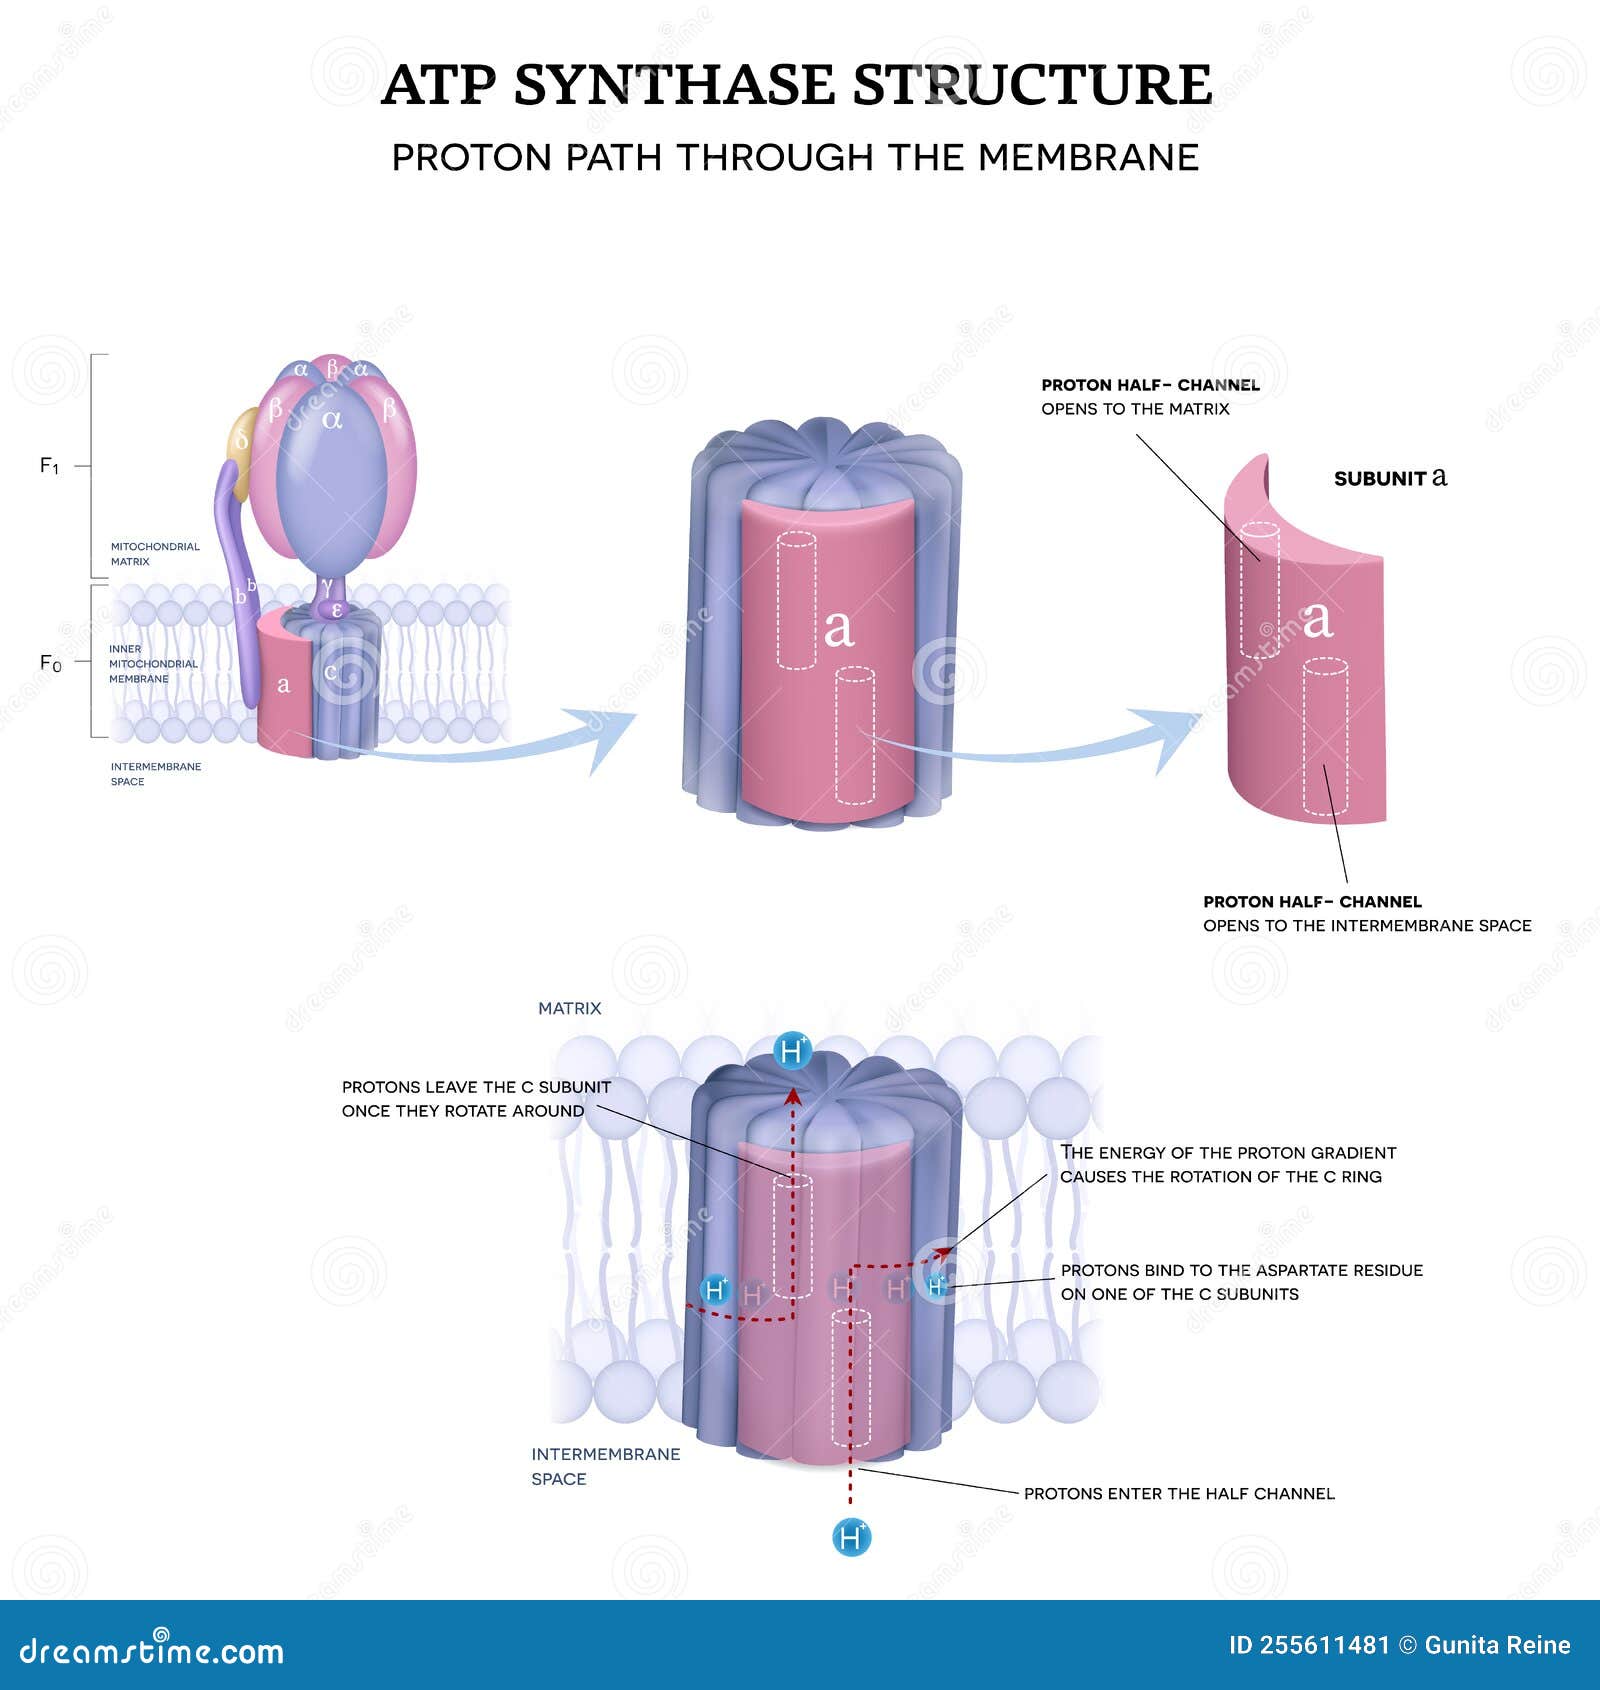 atp synthase structure and proton path